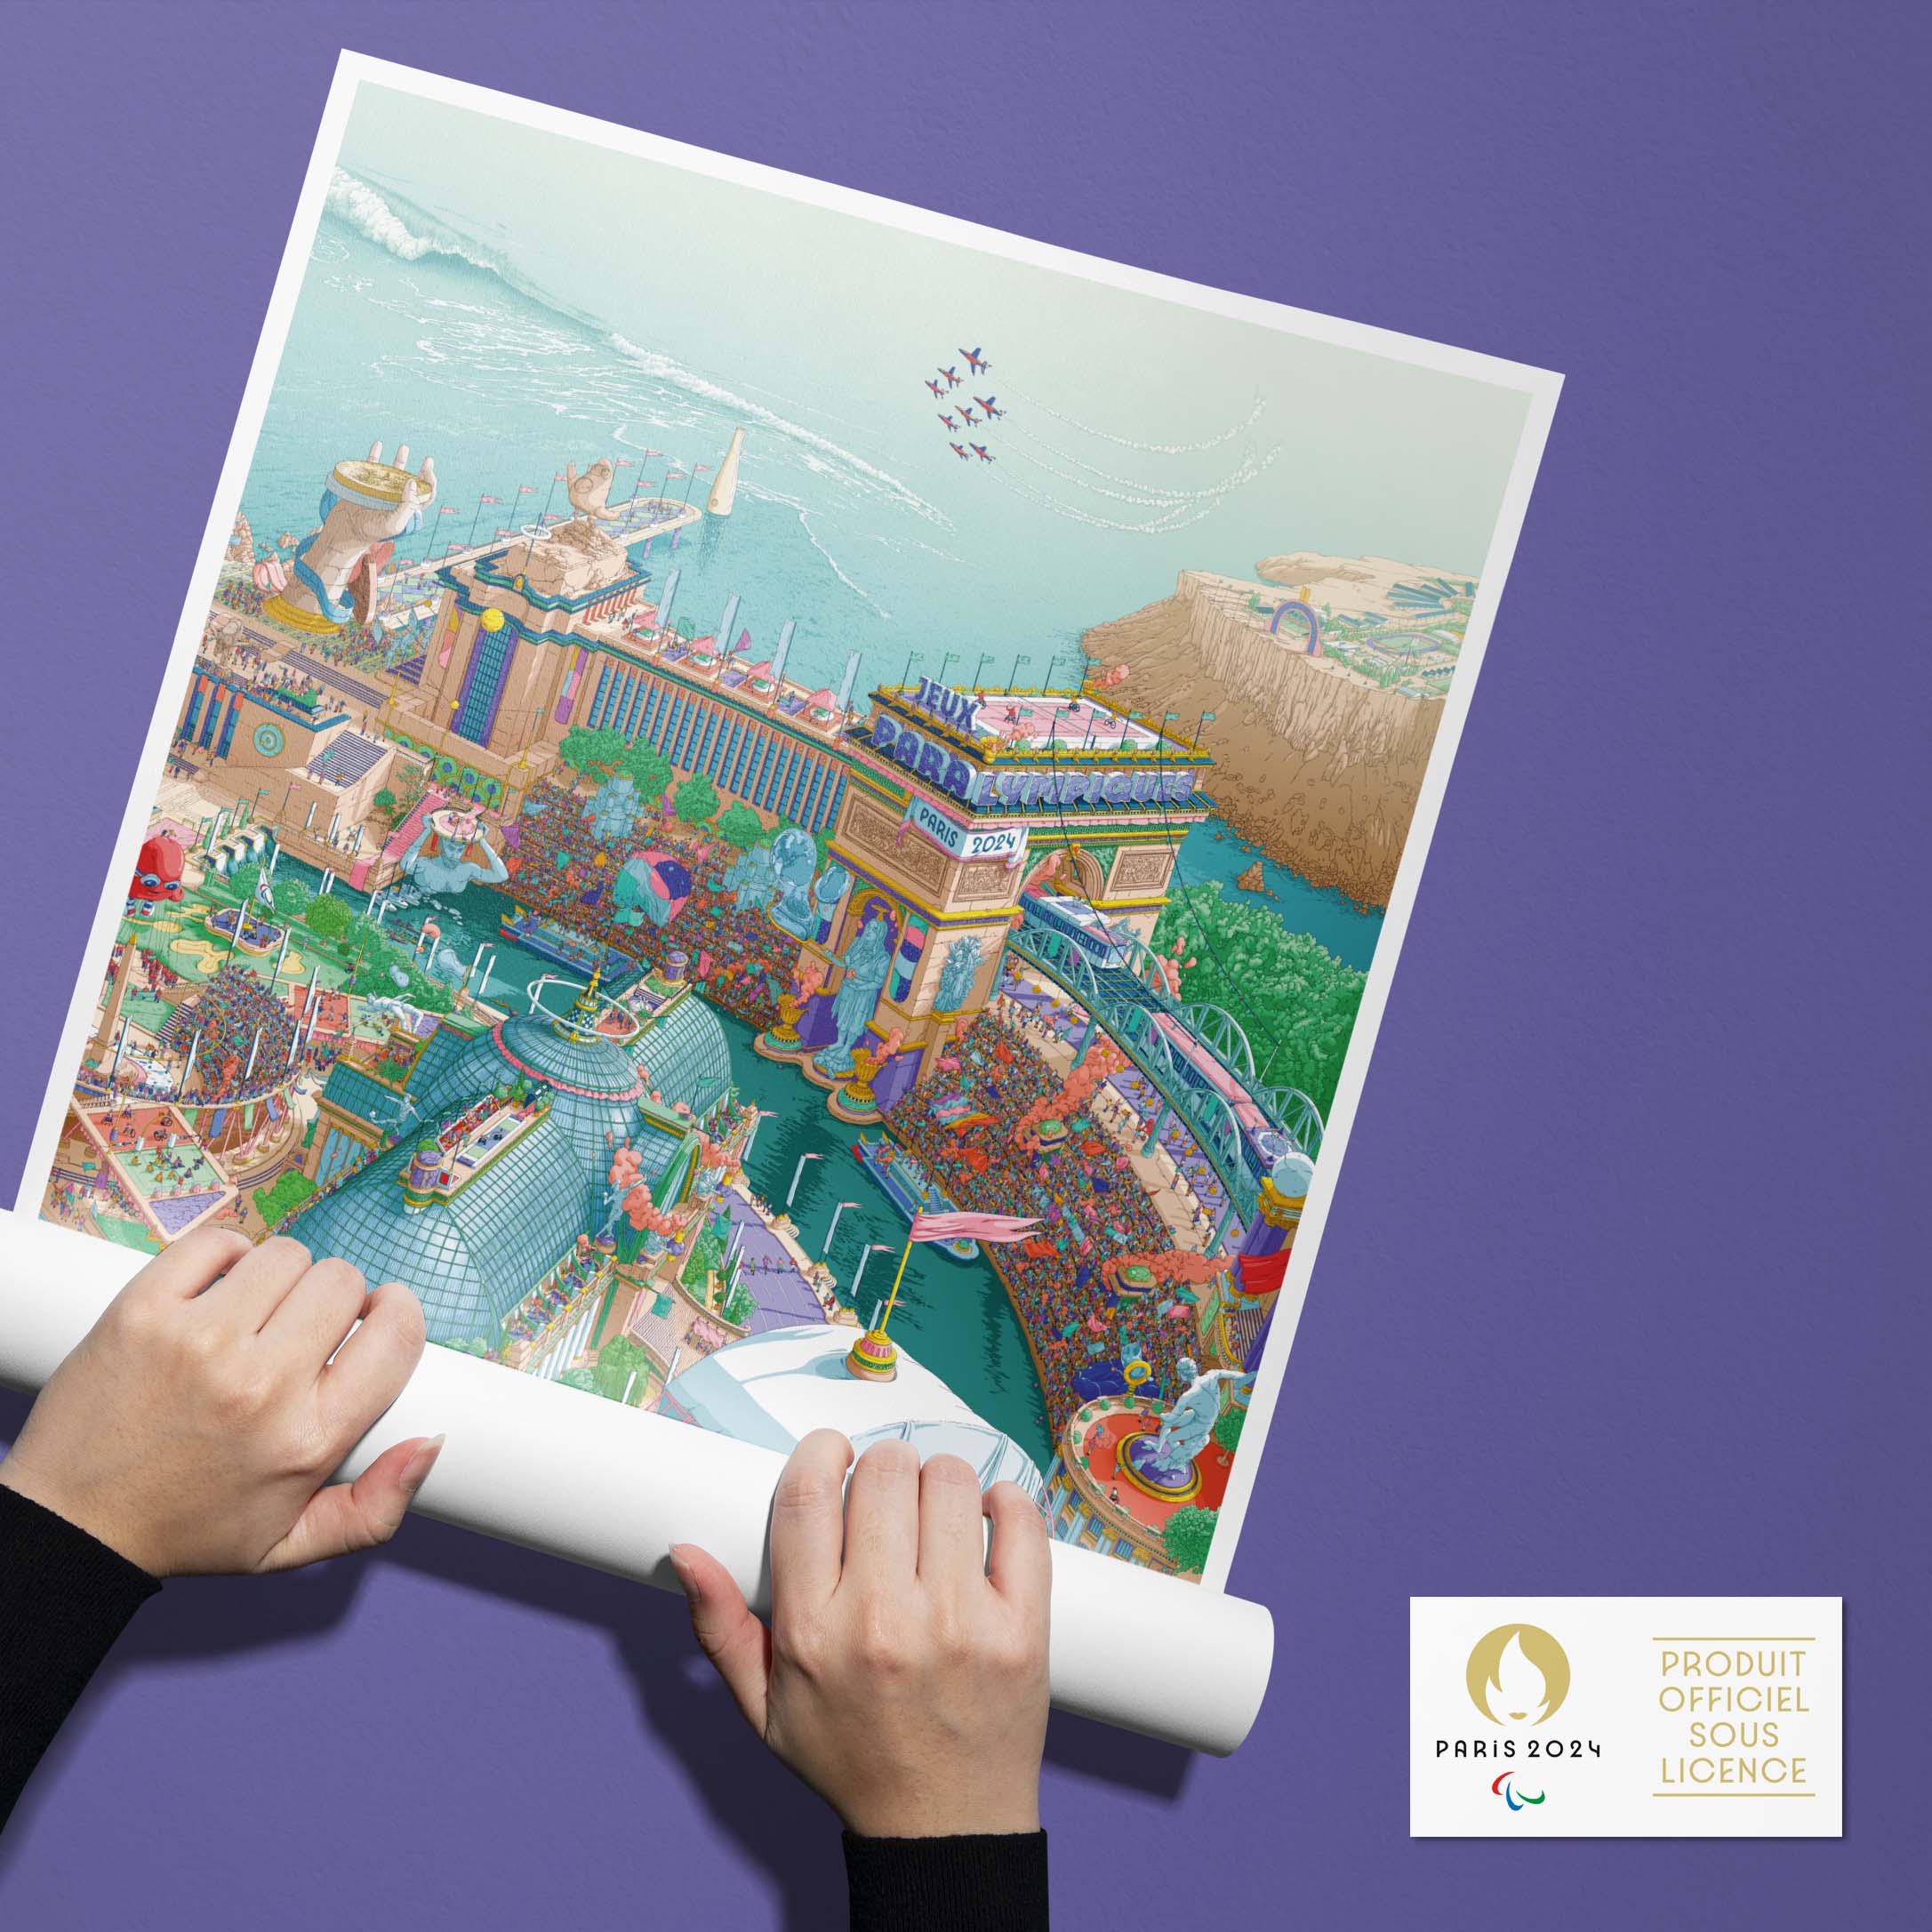 The official poster for the Paris 2024 Paralympic Games - color